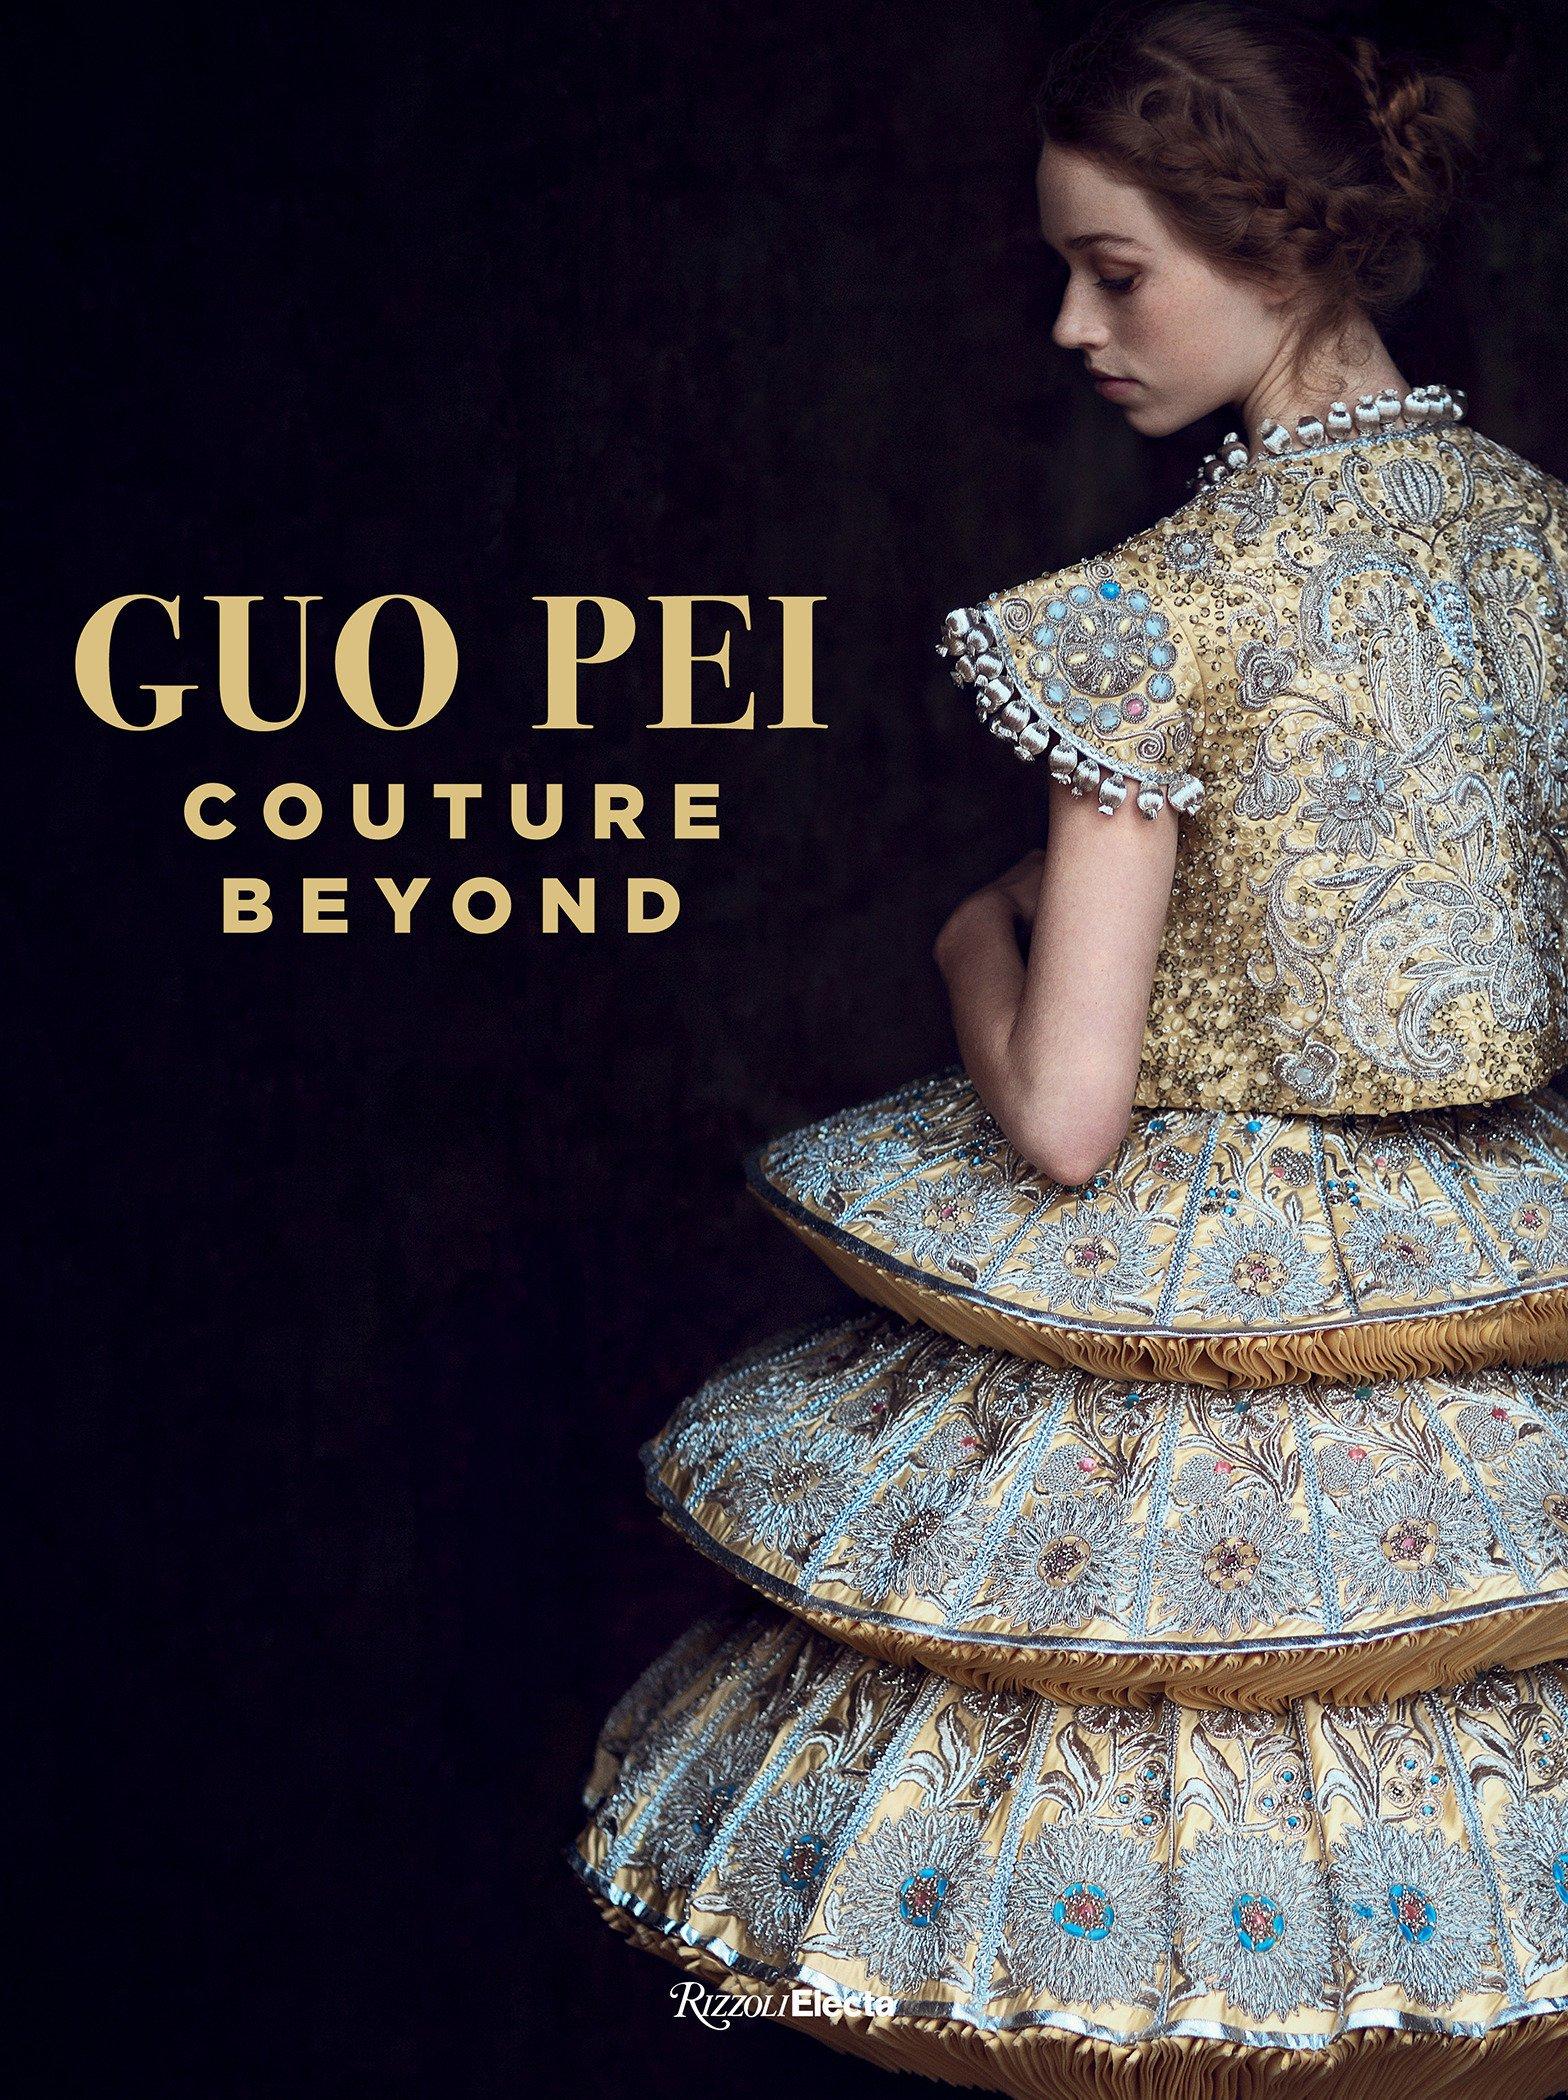 Guo Pei. Couture Beyond